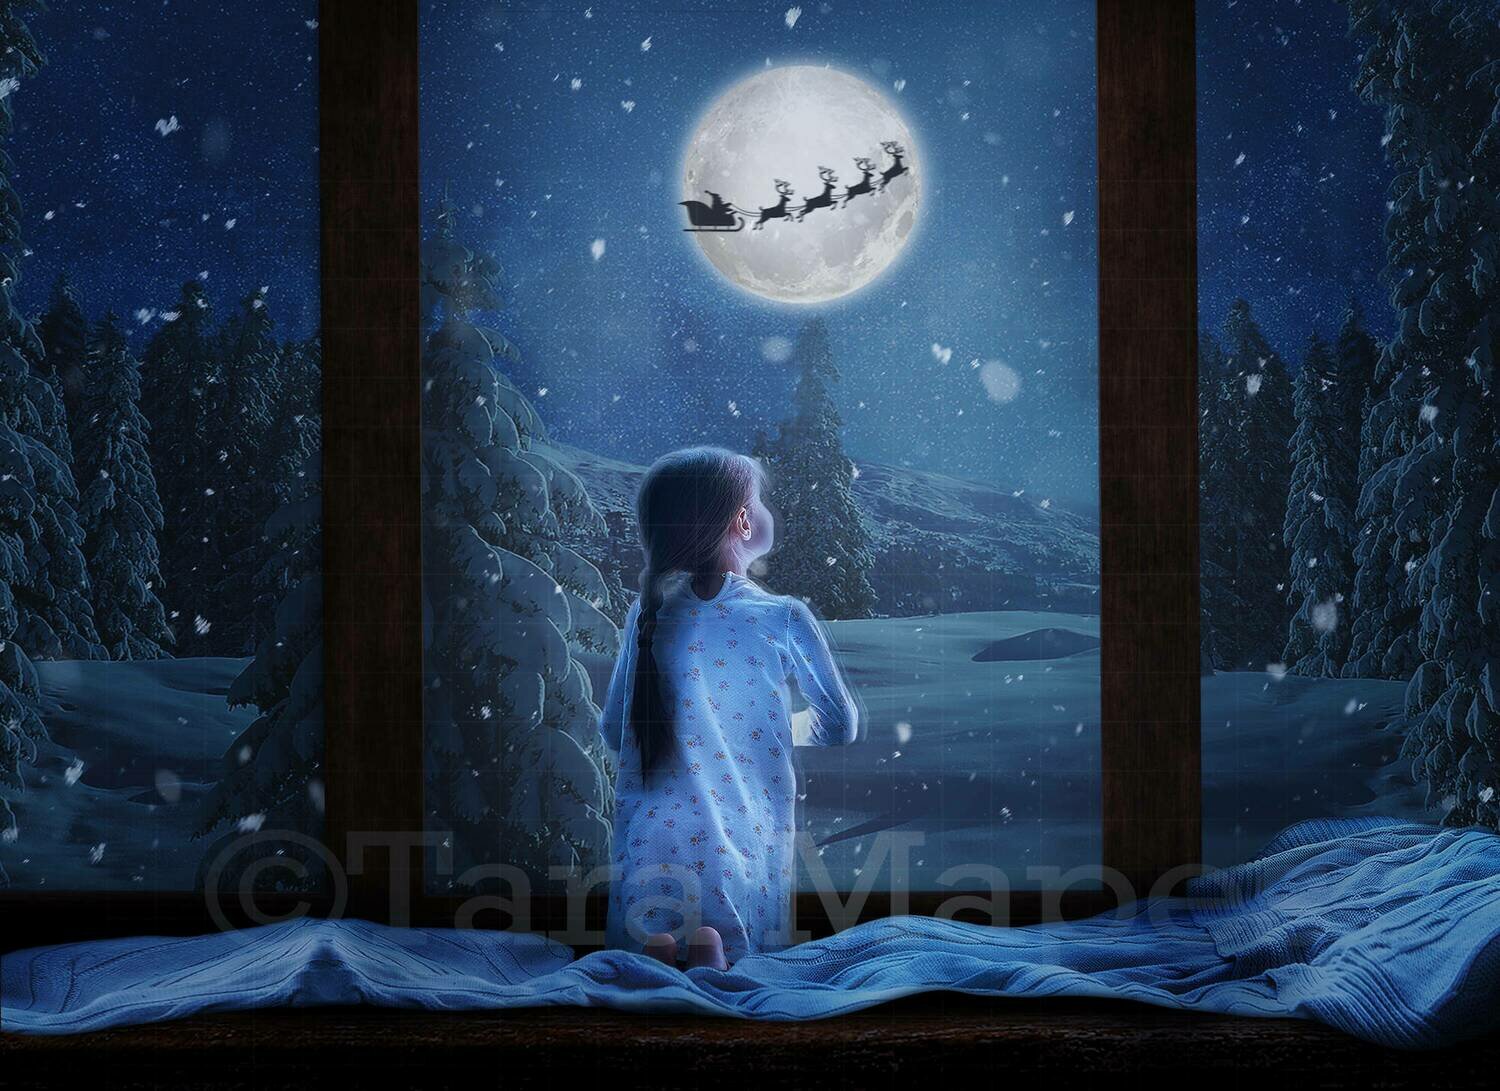 Christmas Window - Christmas Window with Santa in the Moon- Cozy Holiday Window - Digital Background Backdrop by Tara Mapes